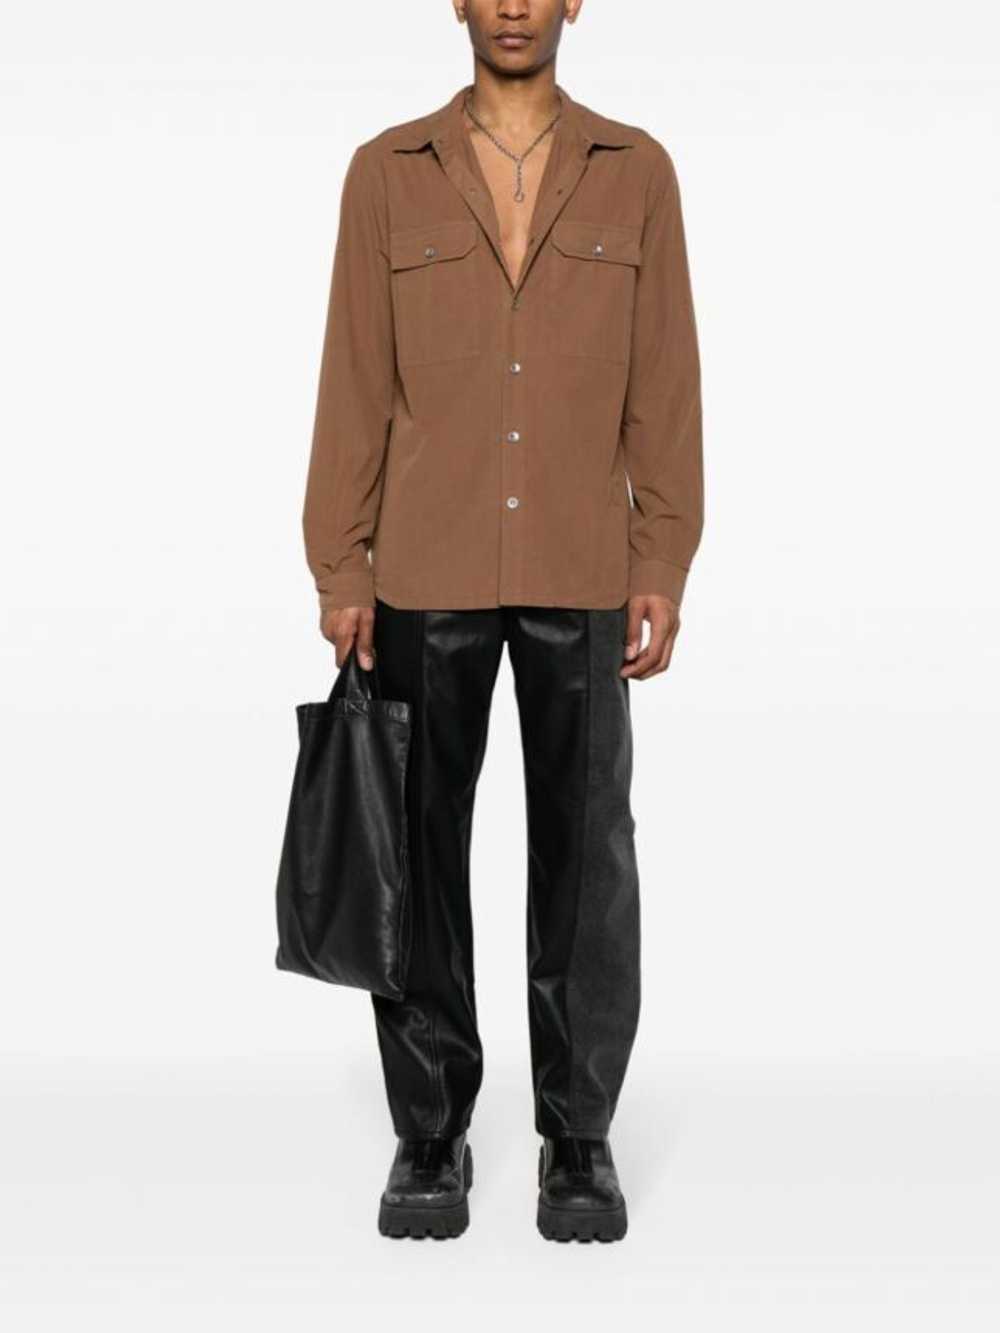 Rick Owens Drkshdw Outershirt - image 2